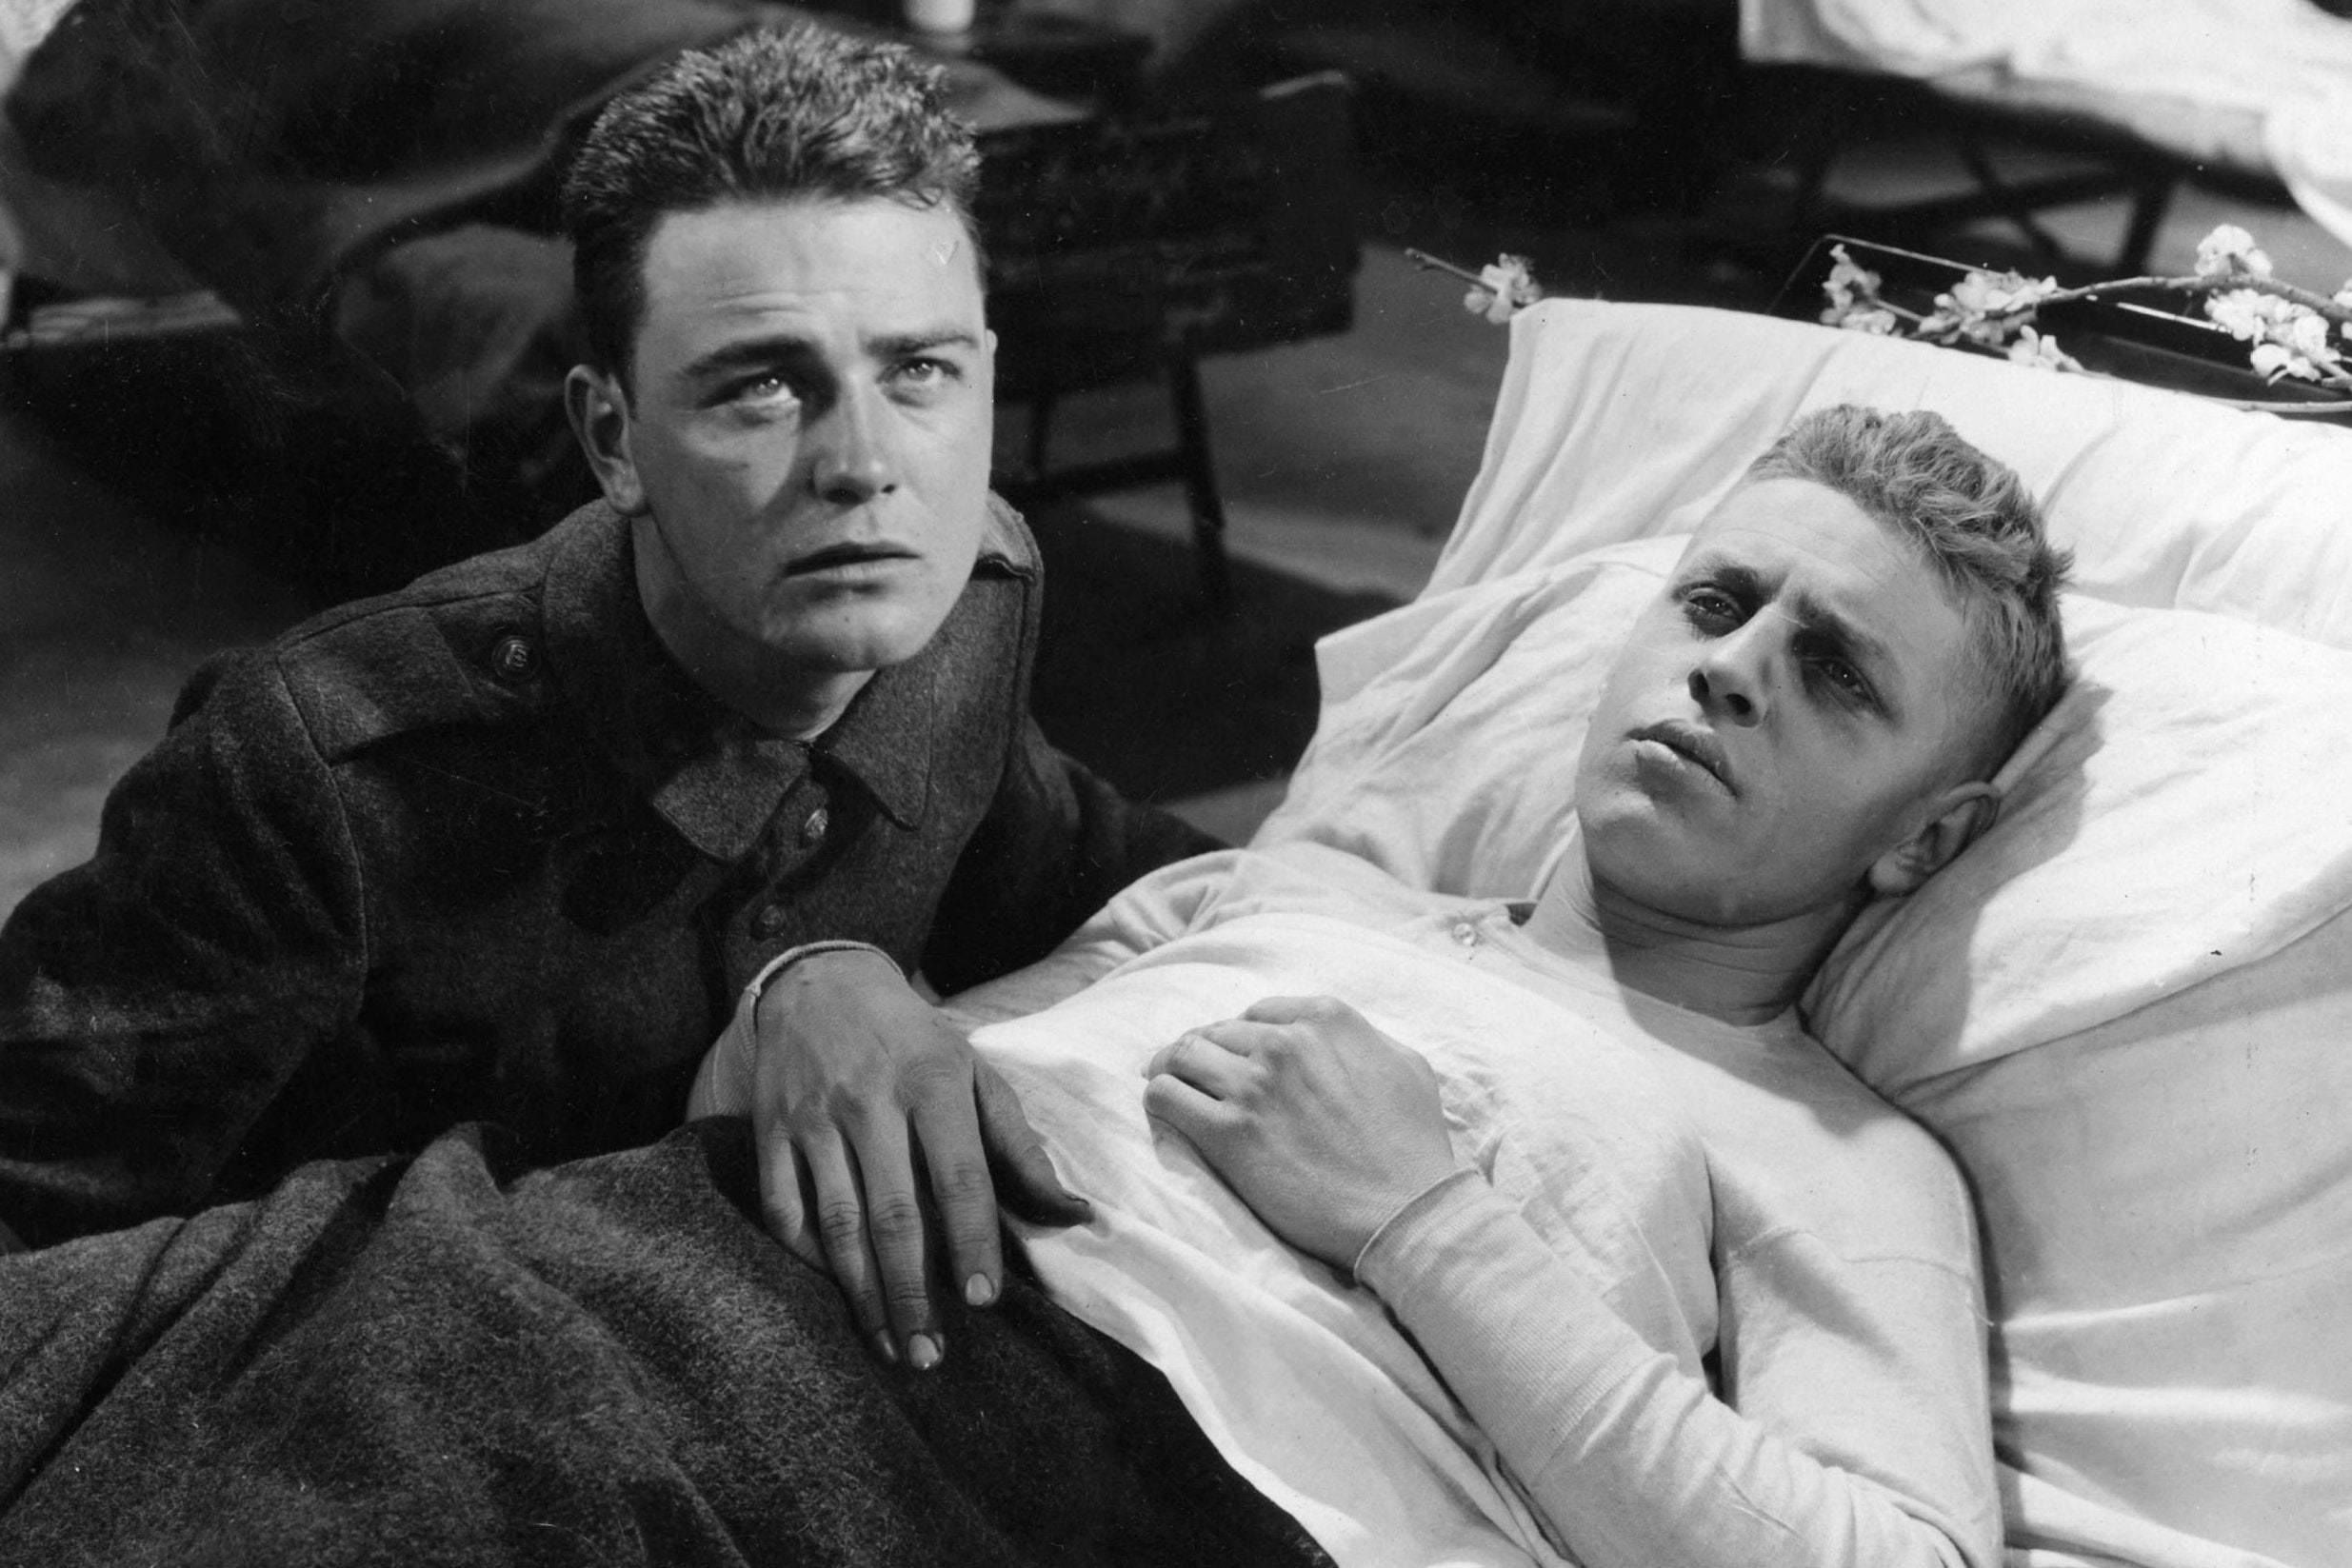 Lew Ayres and Ben Alexander in All Quiet On The Western Front